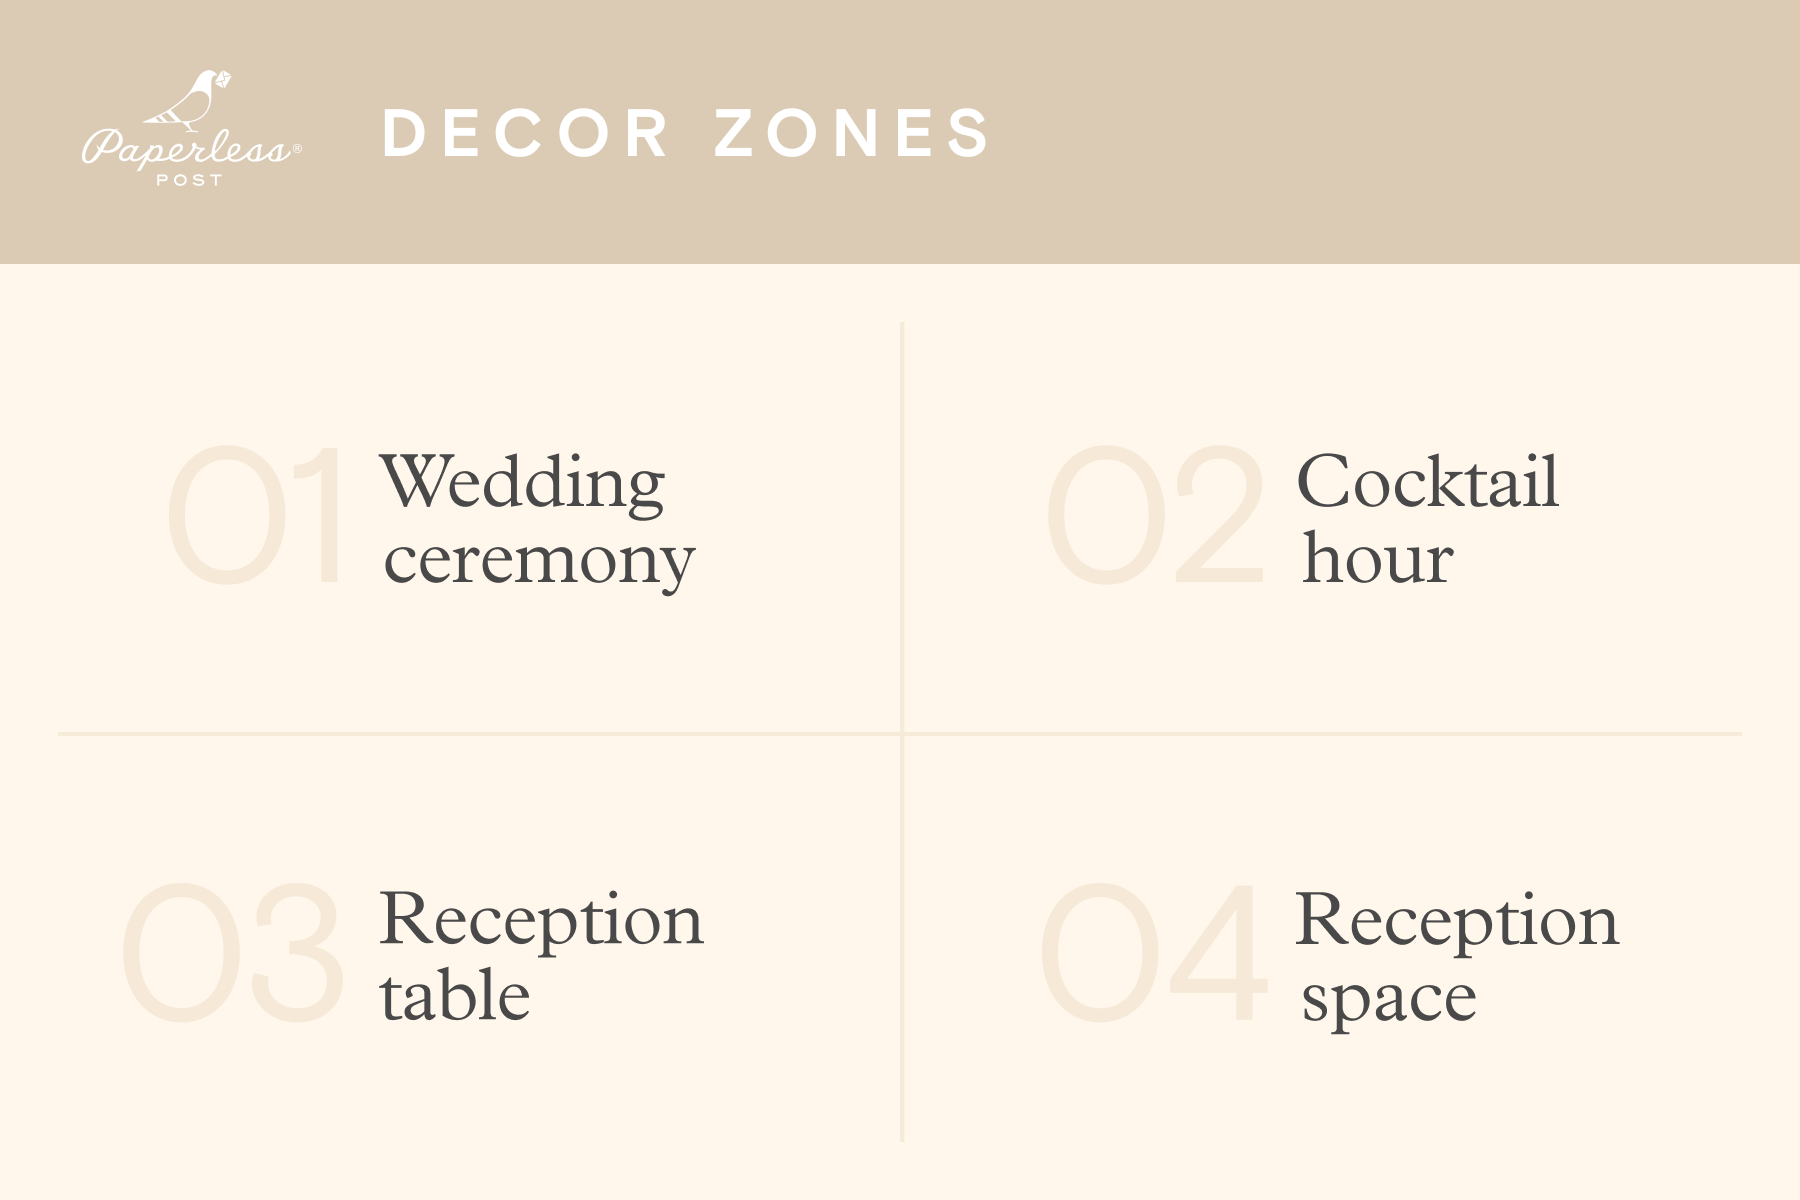 An infographic that reads “Decor zones” 01. Wedding ceremony, 02. Cocktail hour, 03. Reception table, 04. Reception space.